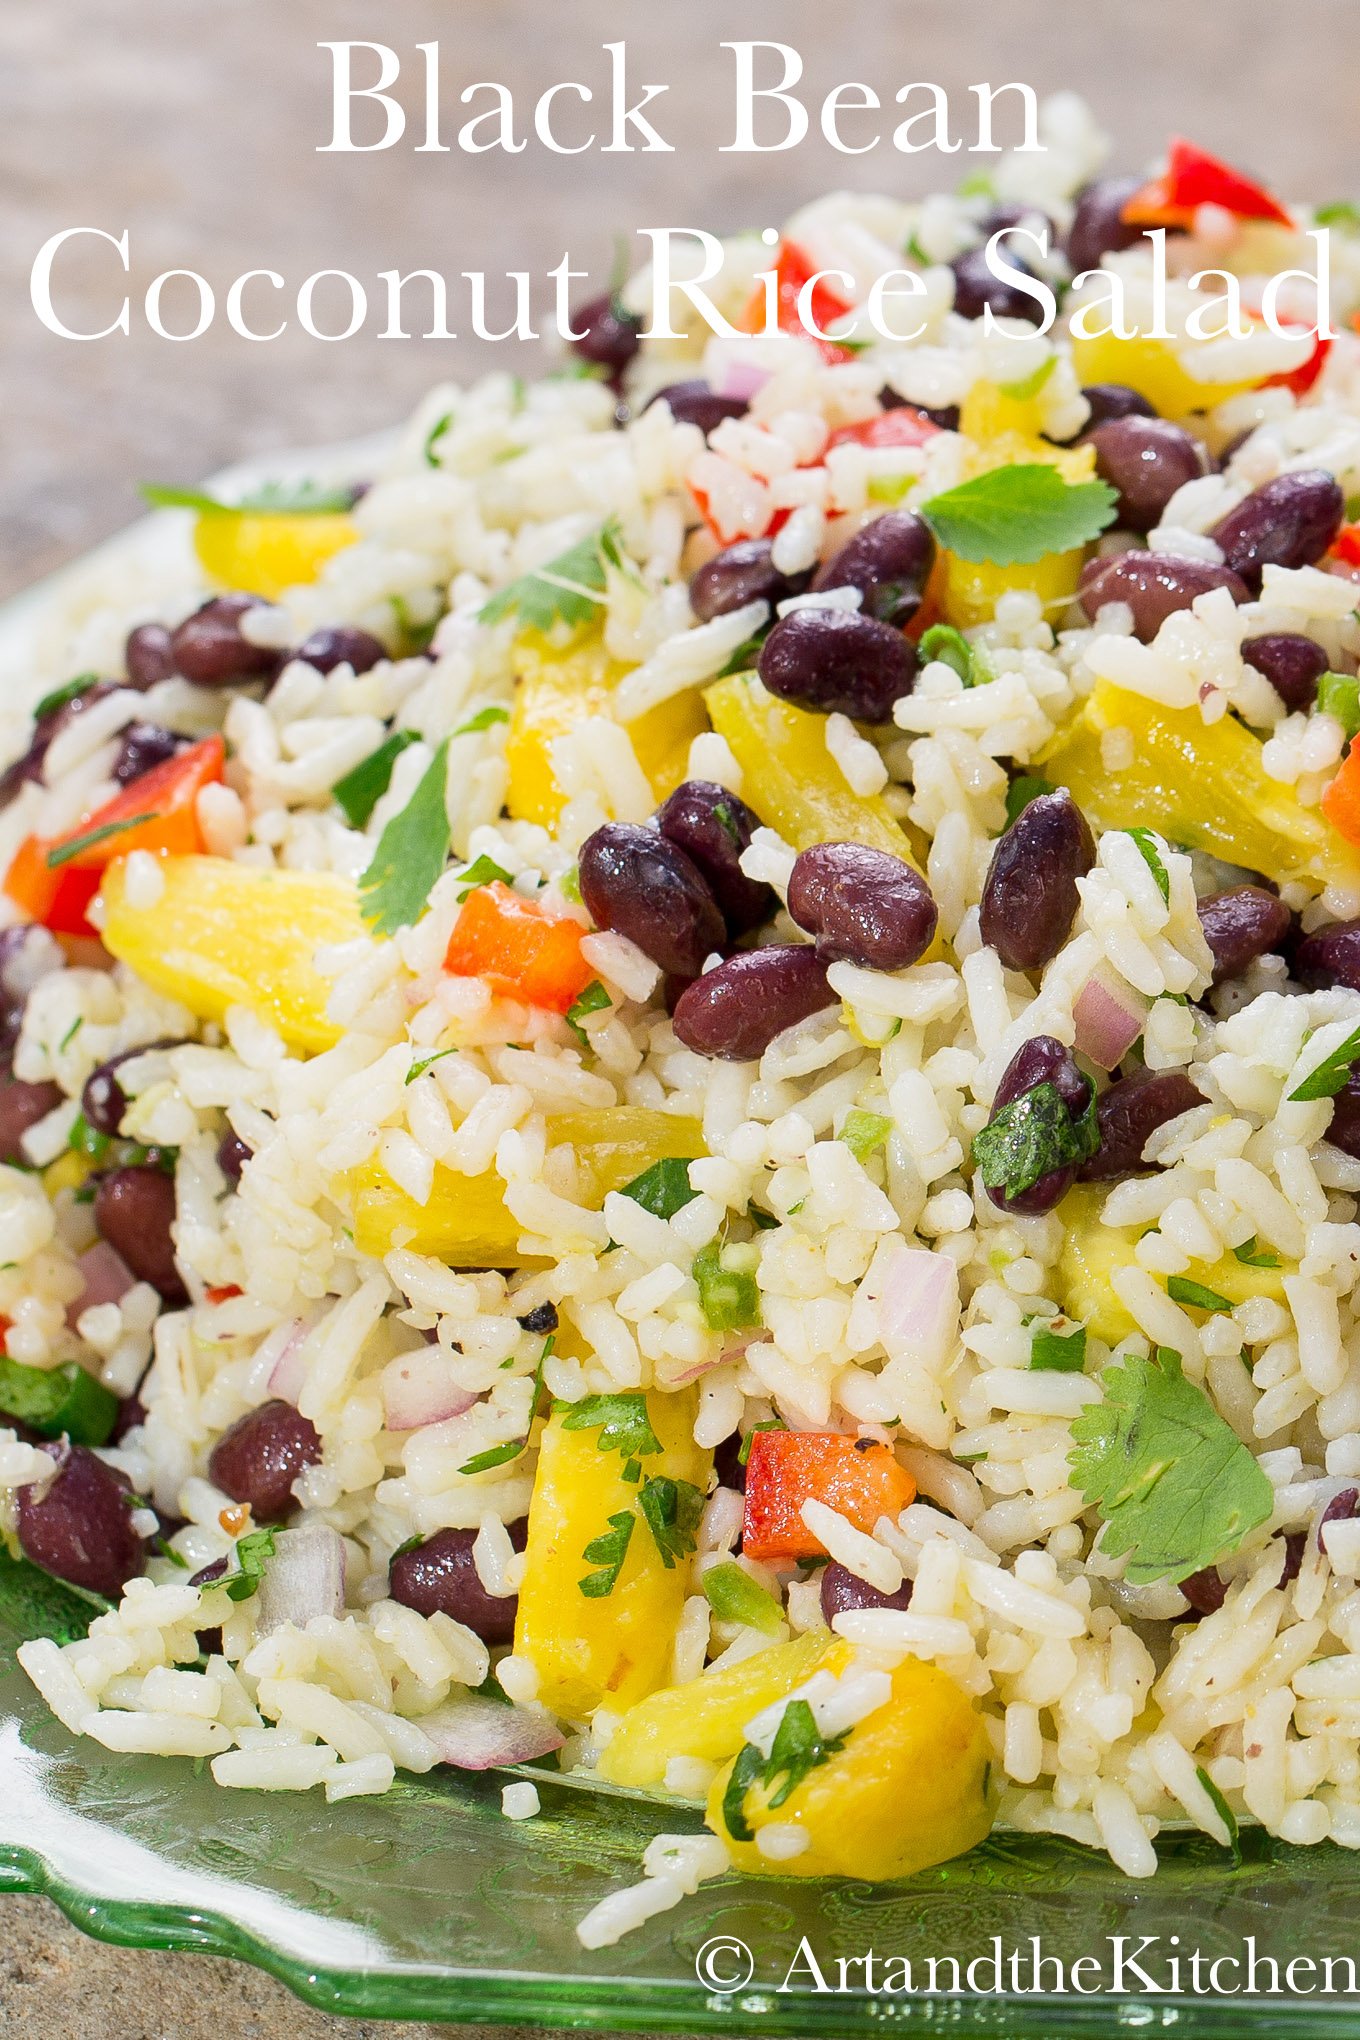 Black Bean Coconut Rice Salad is a colorful, zesty salad with a delicious combination of ingredients like coconut-infused rice, beans, bell peppers, red onion, and pineapple. via @artandthekitch